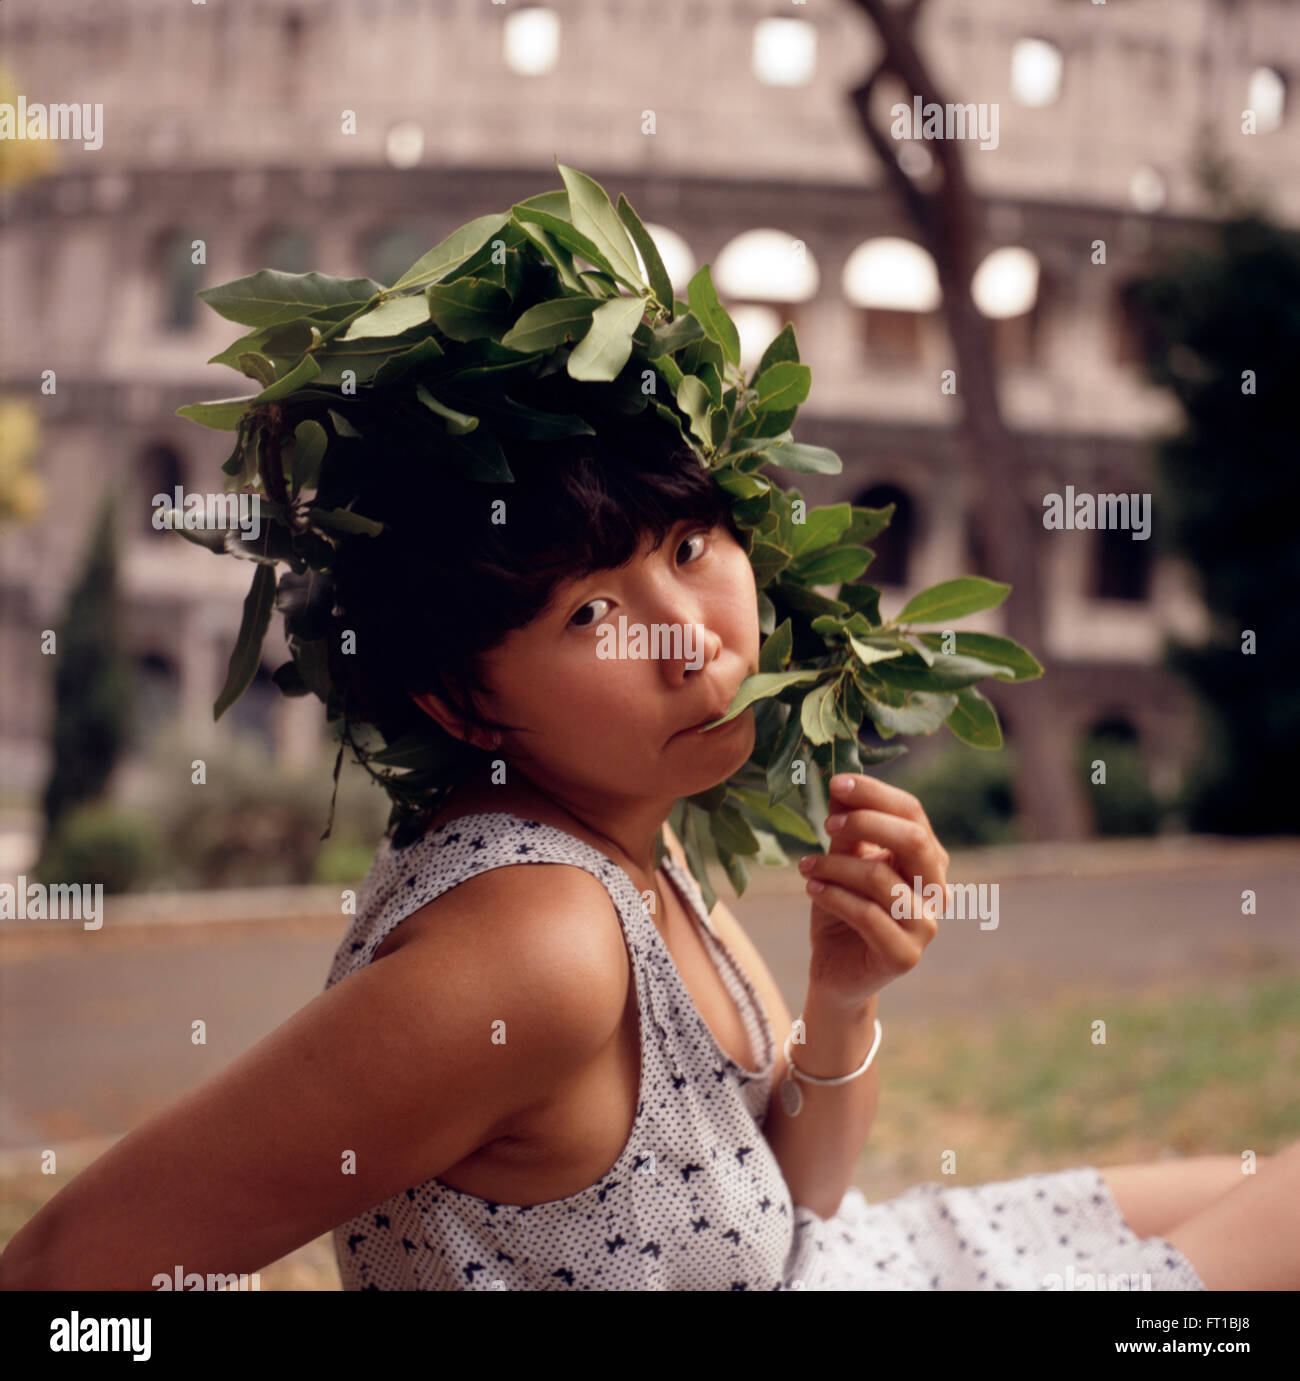 Asian girl with a laurel wreath on her head, in front of Colosseum, Rome, Italy Stock Photo